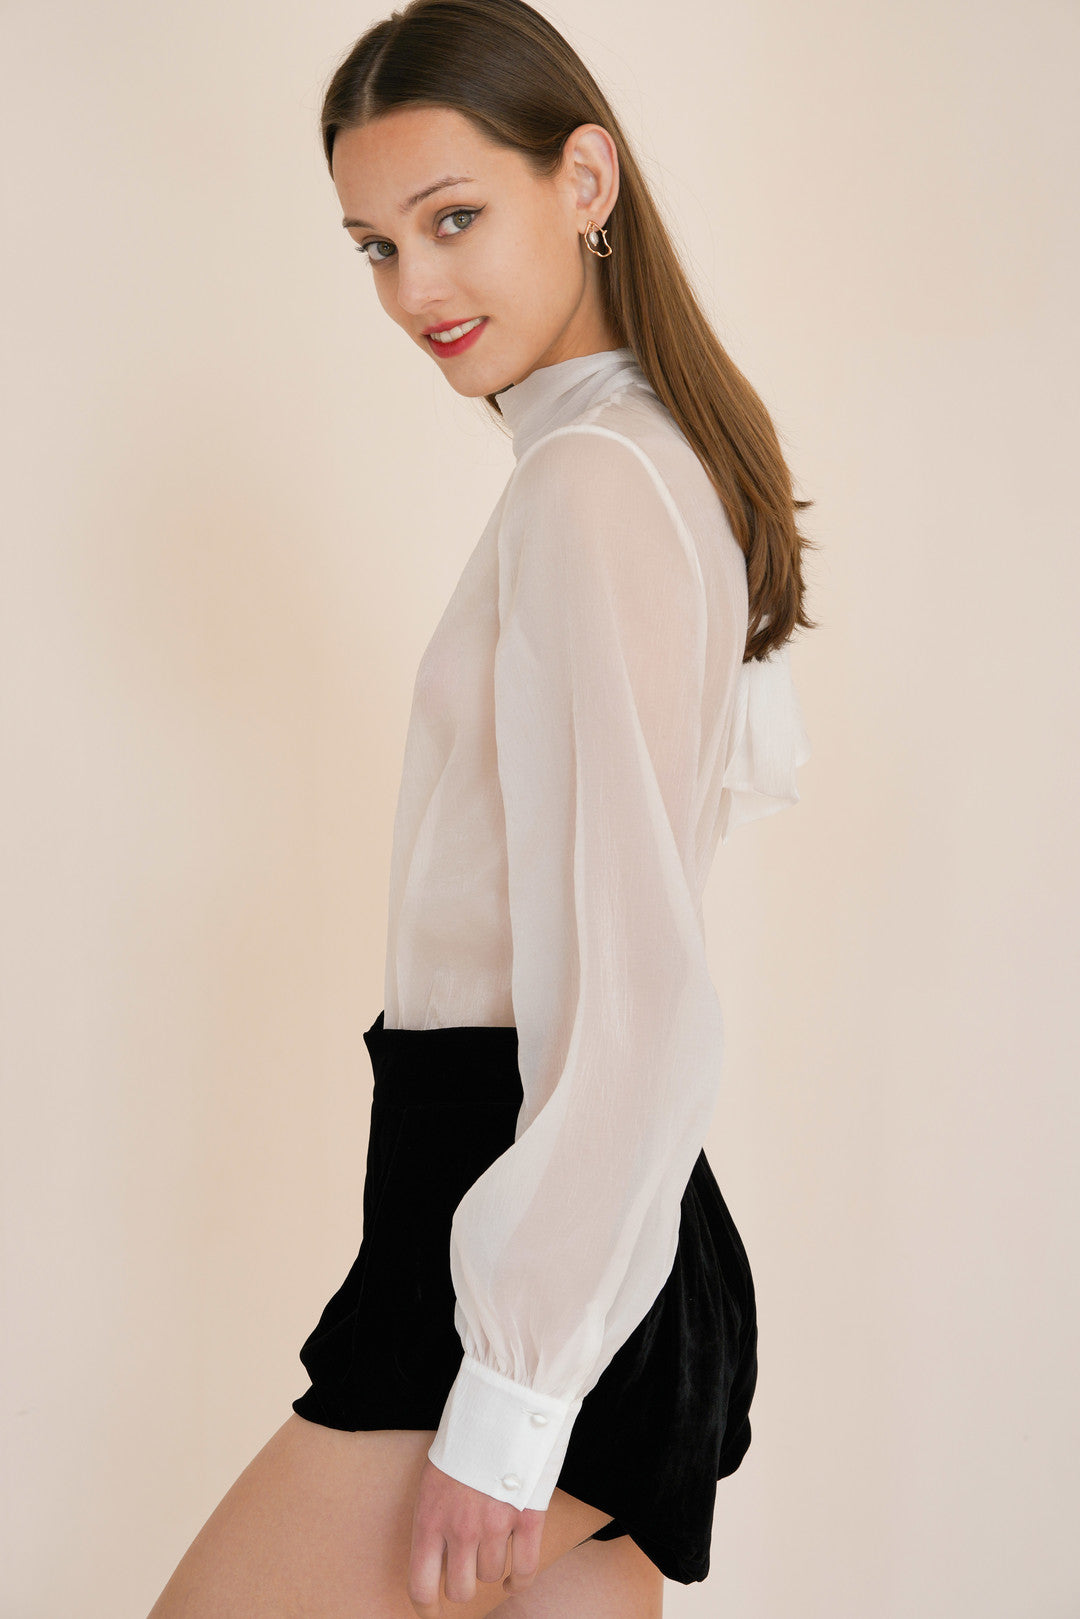 UUNIQ SWAN SONG Tied Bow White Mesh Blouse